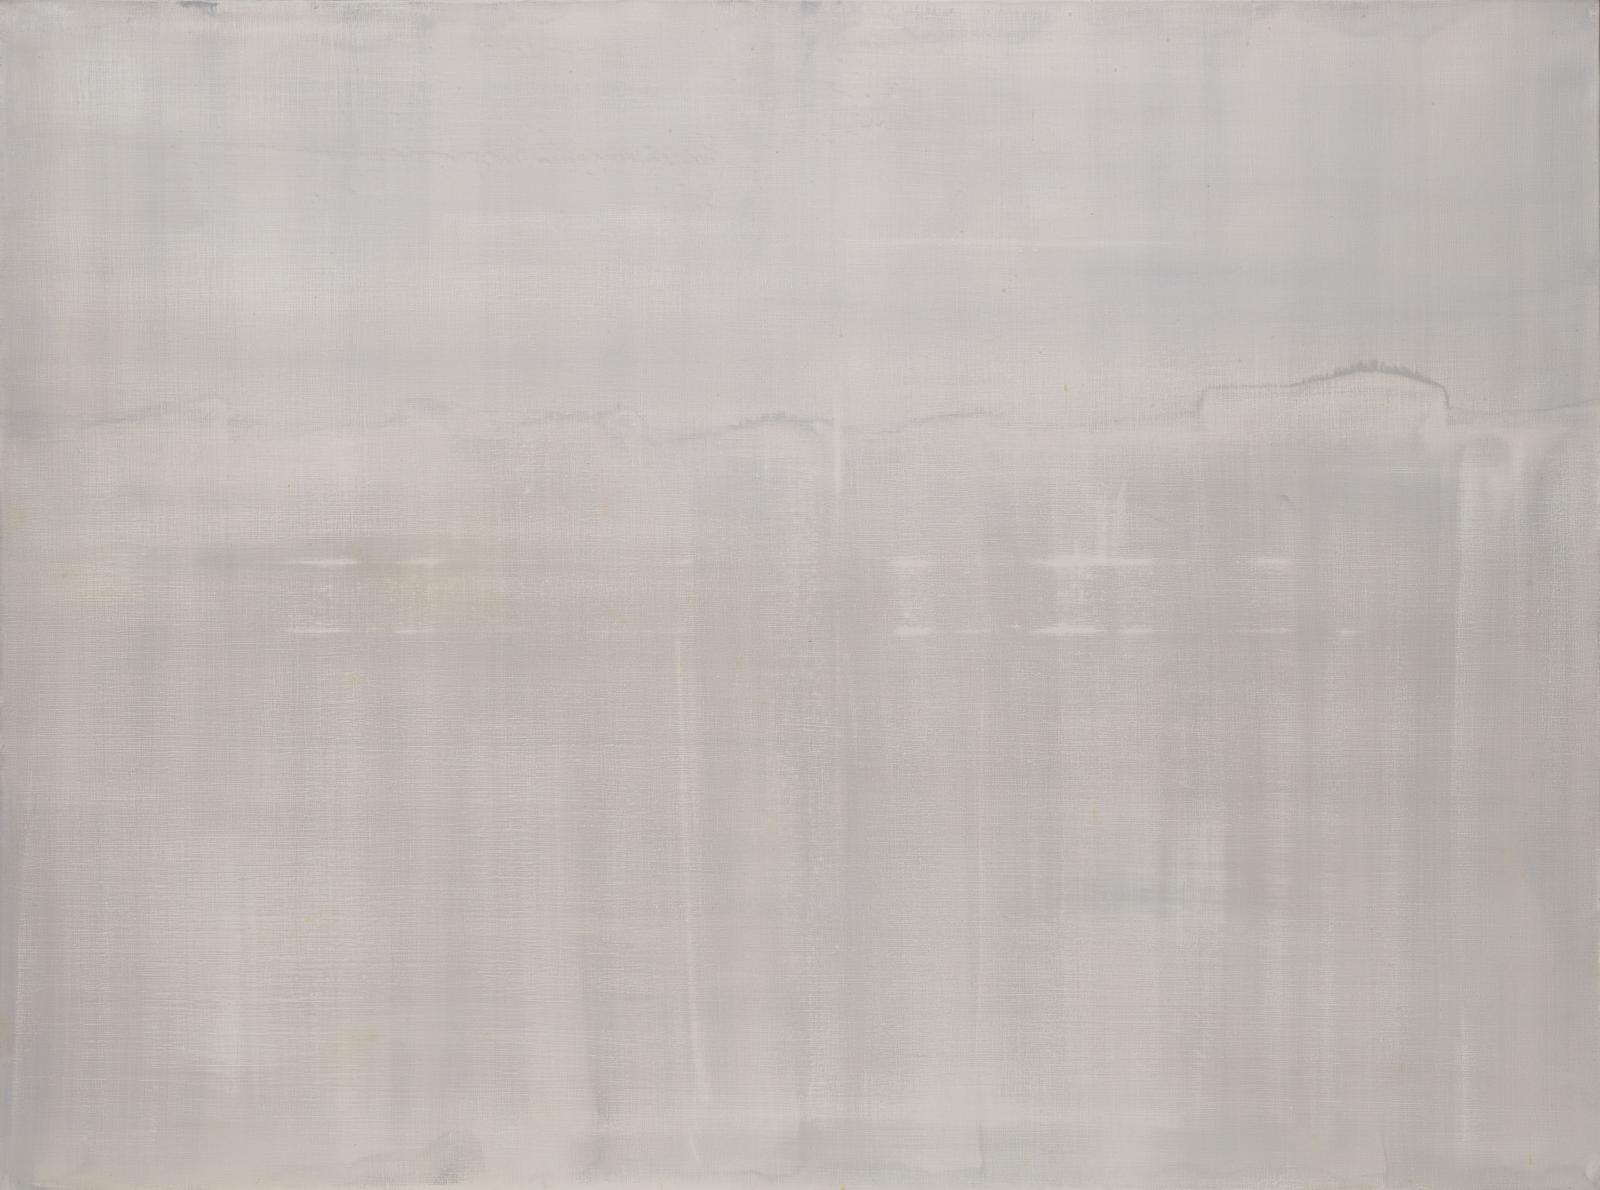 an abstract painting in warm grey tones